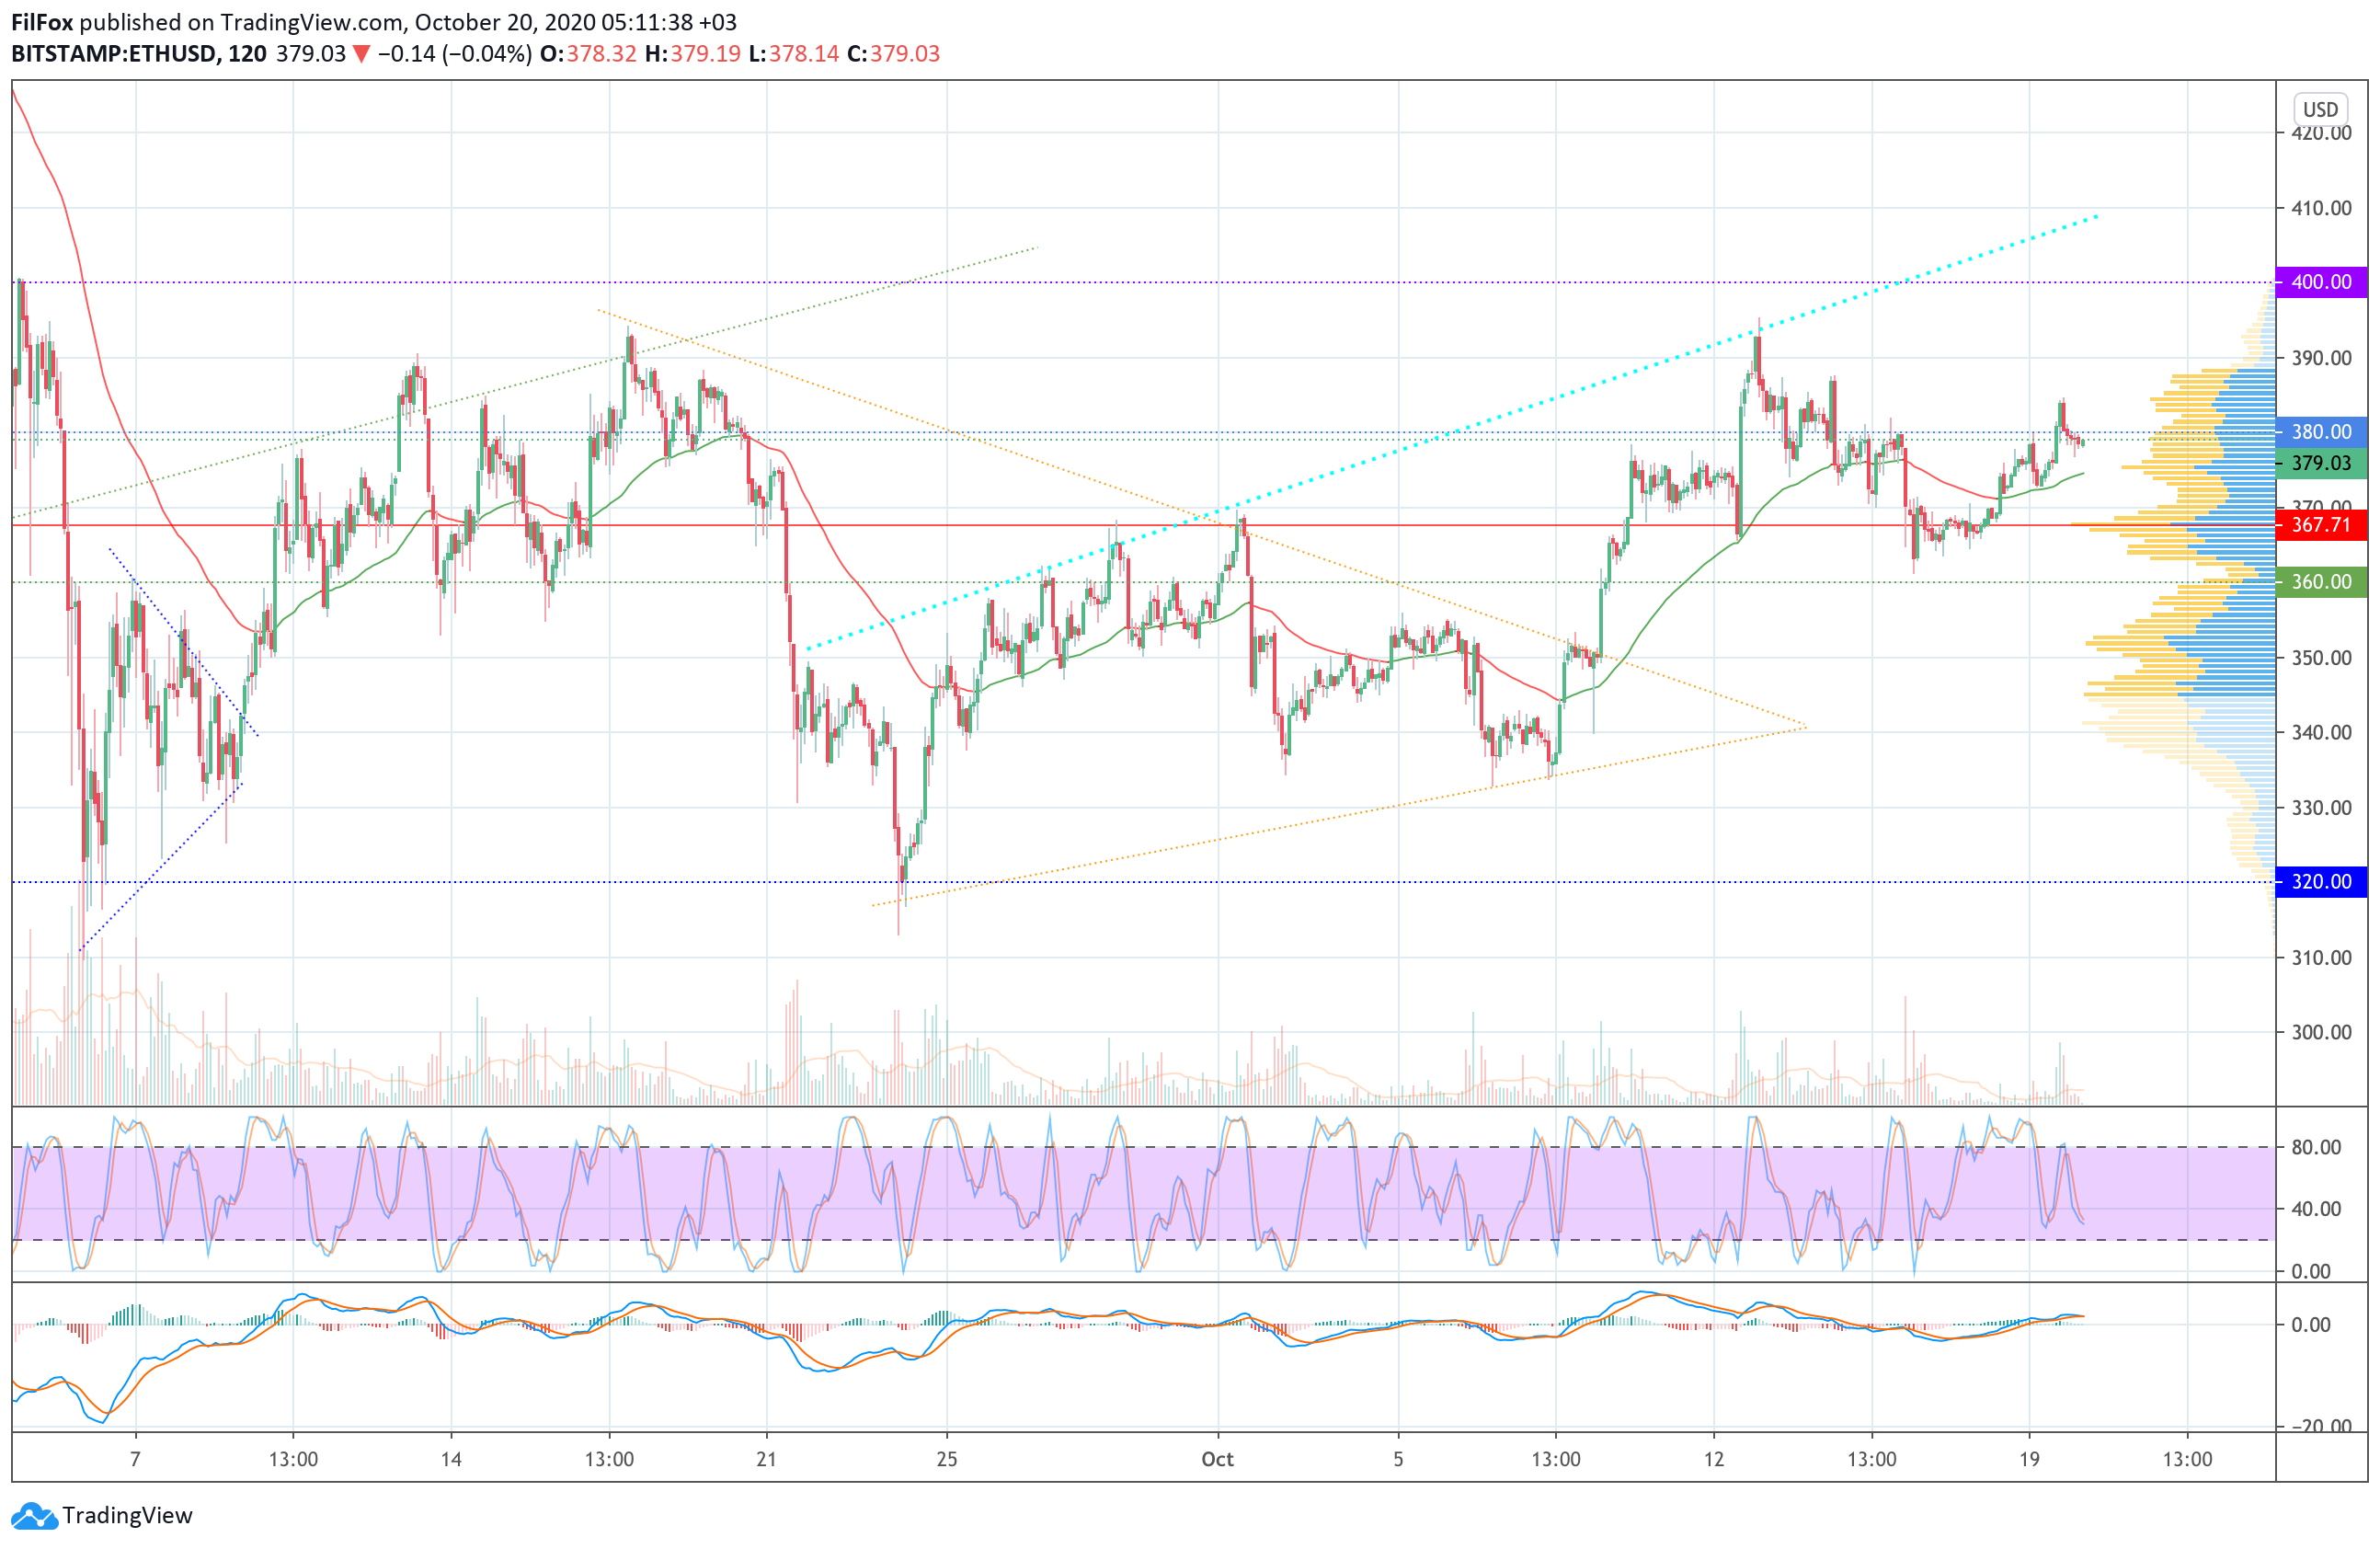 Analysis of prices for Bitcoin, Ethereum, XRP for 10/20/2020